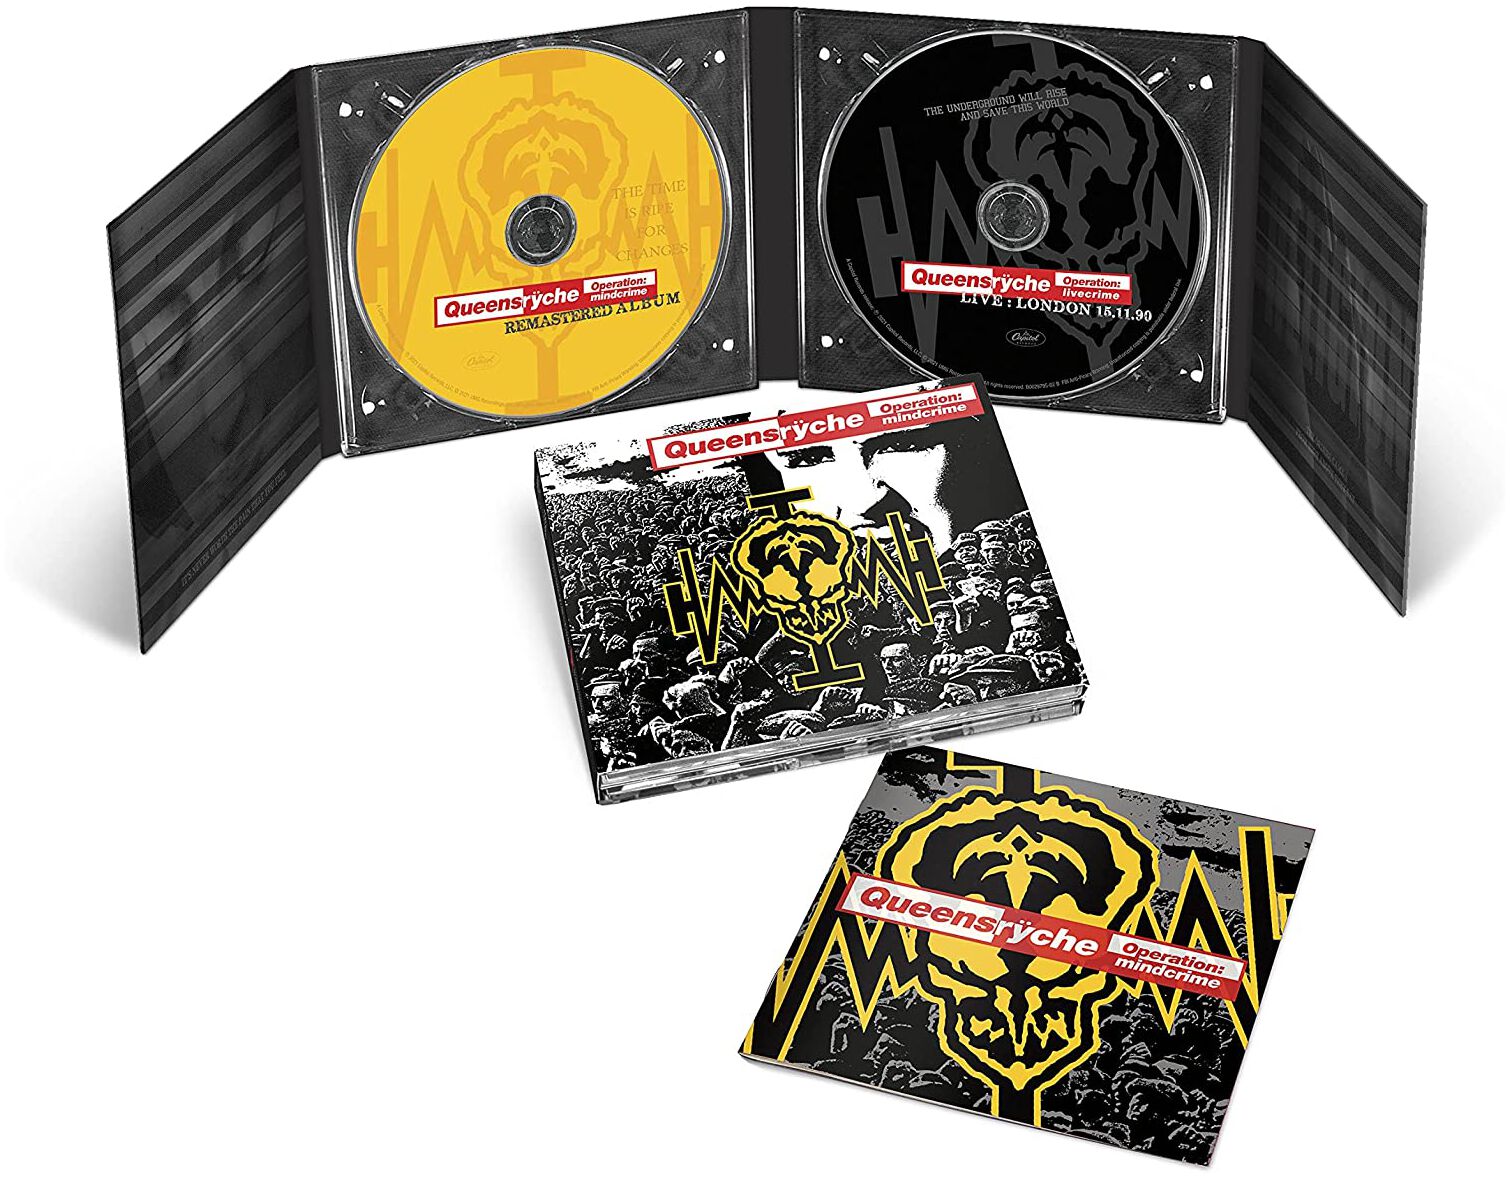 Image of Queensryche Operation mindcrime 2-CD Standard